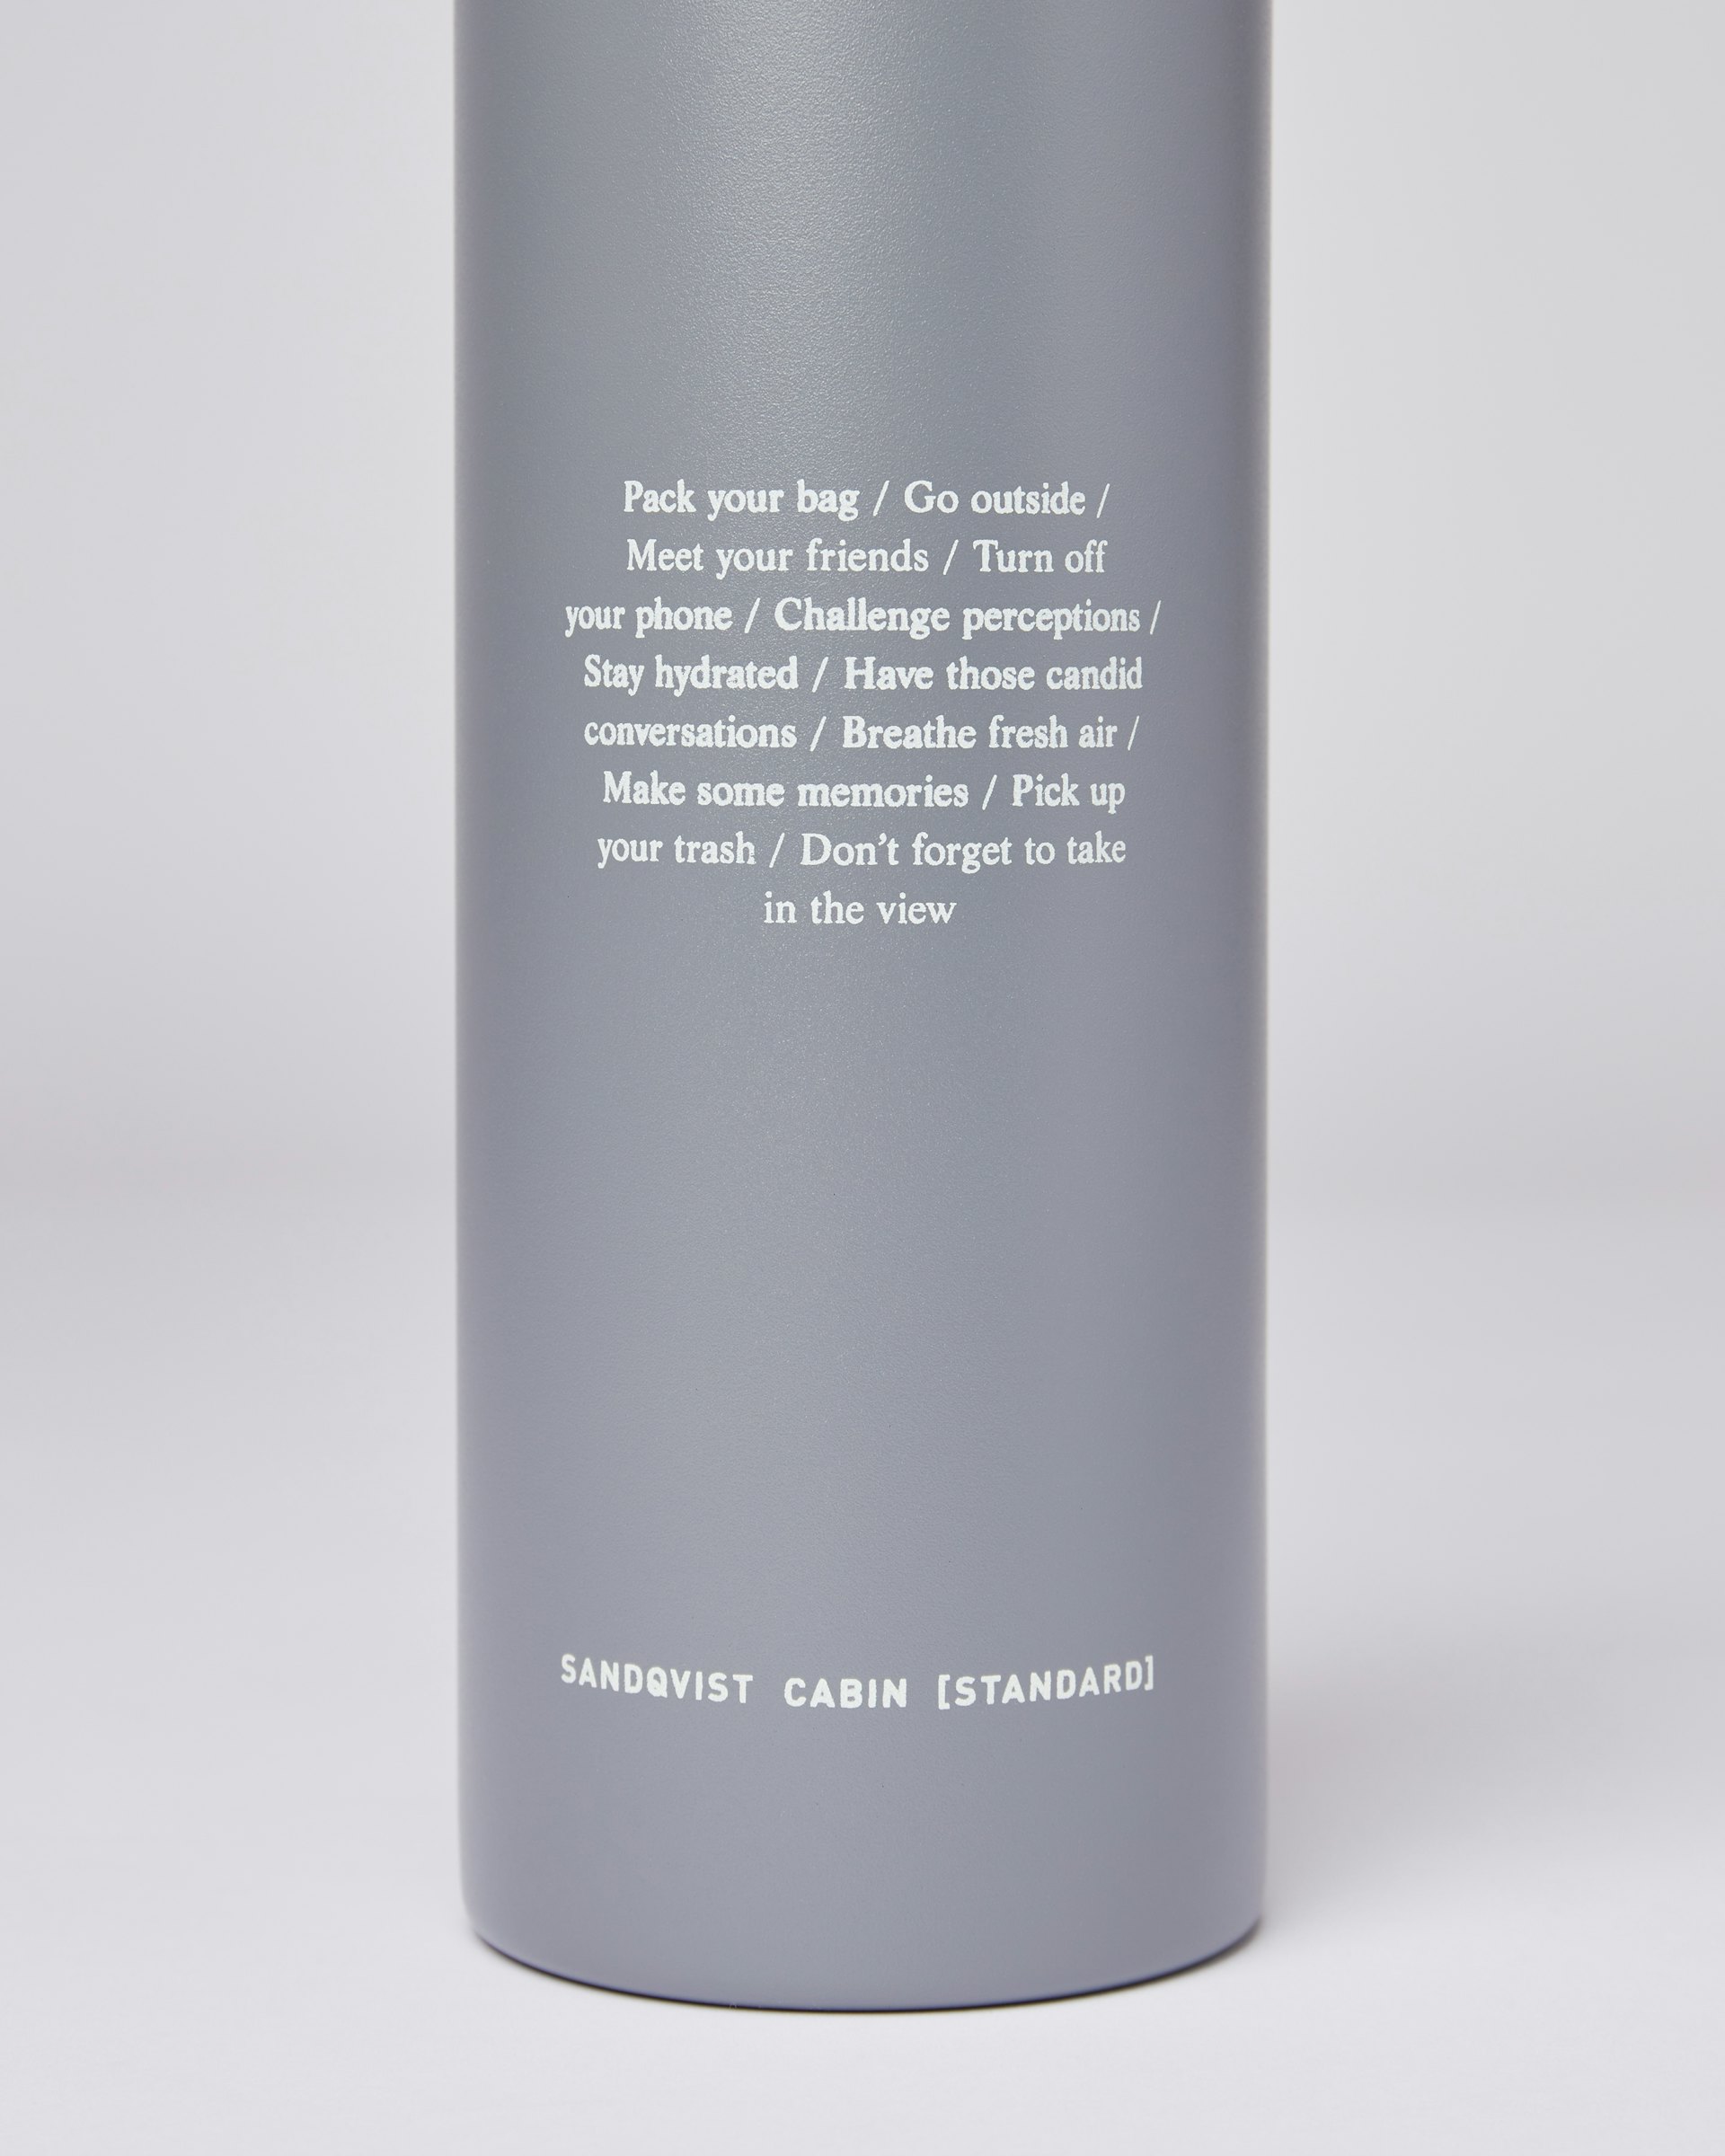 23oz Bottle belongs to the category Items and is in color grey (3 of 3)